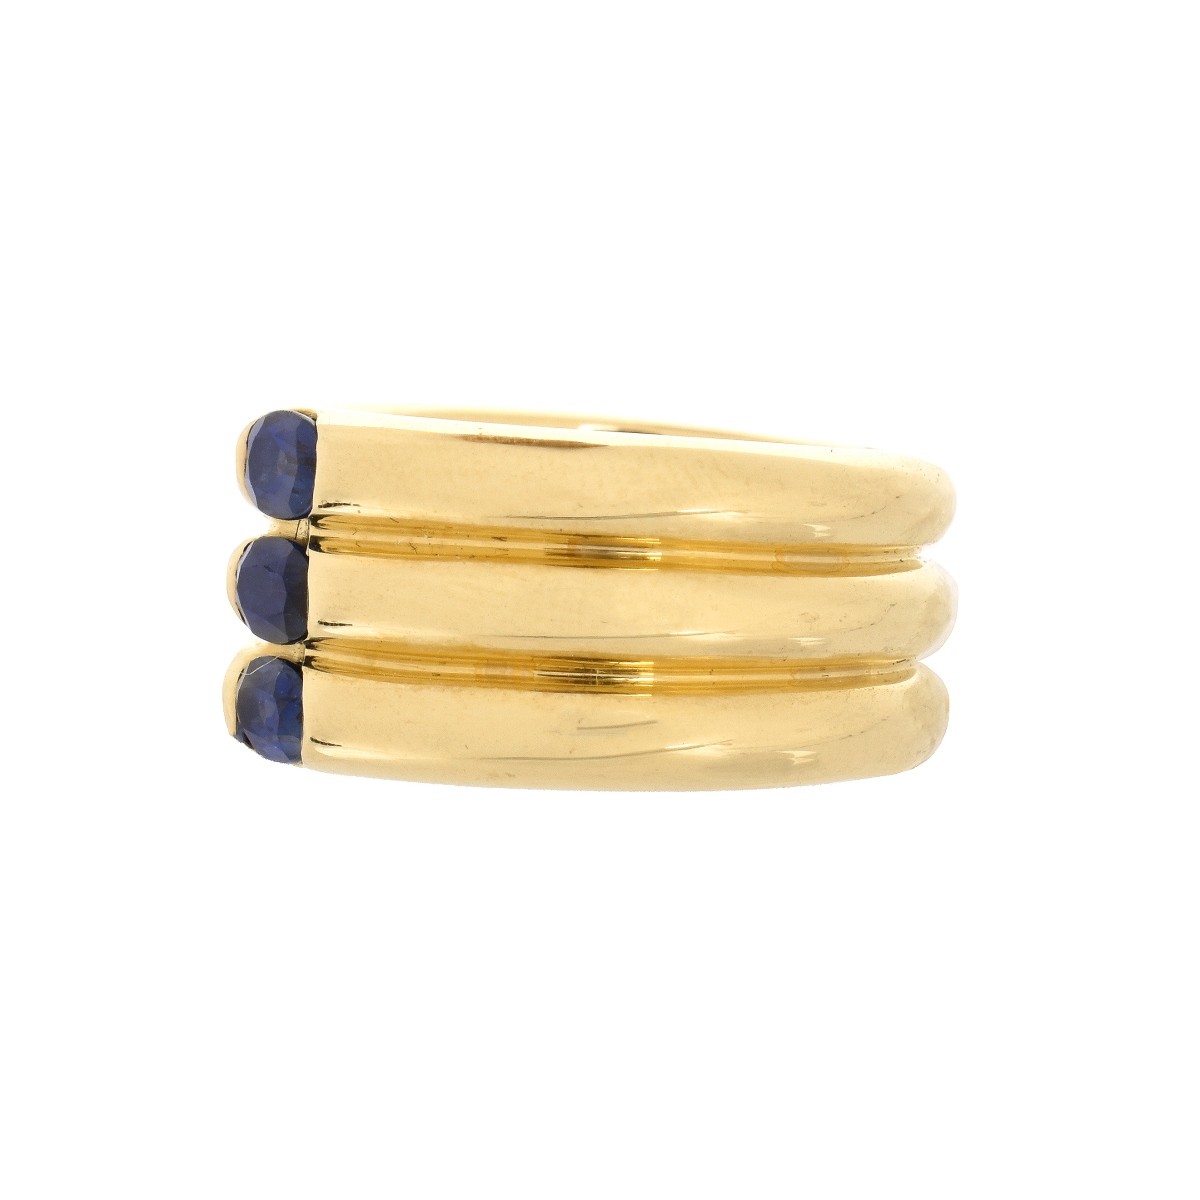 Cartier Sapphire and 18K Ring